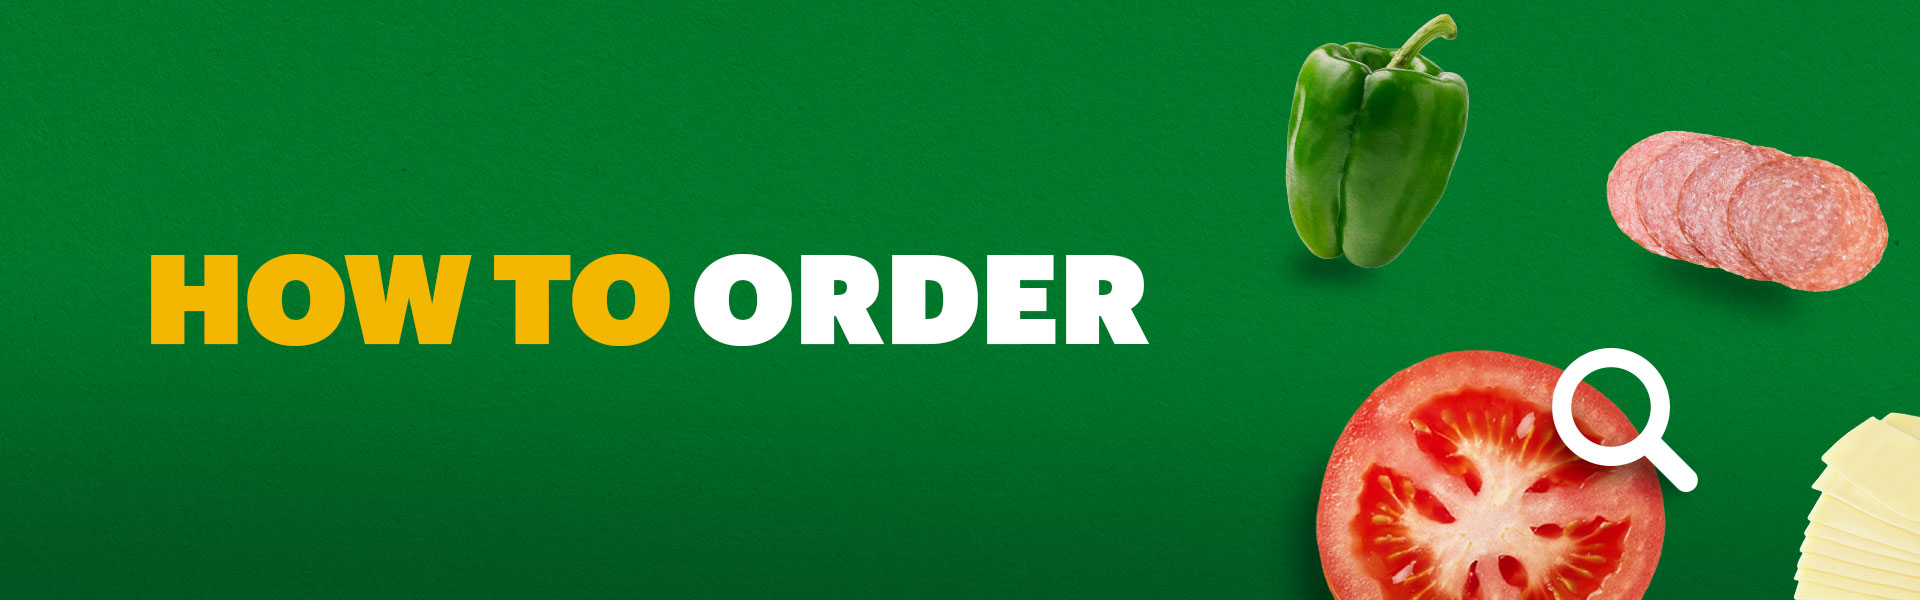 How to Order Subway